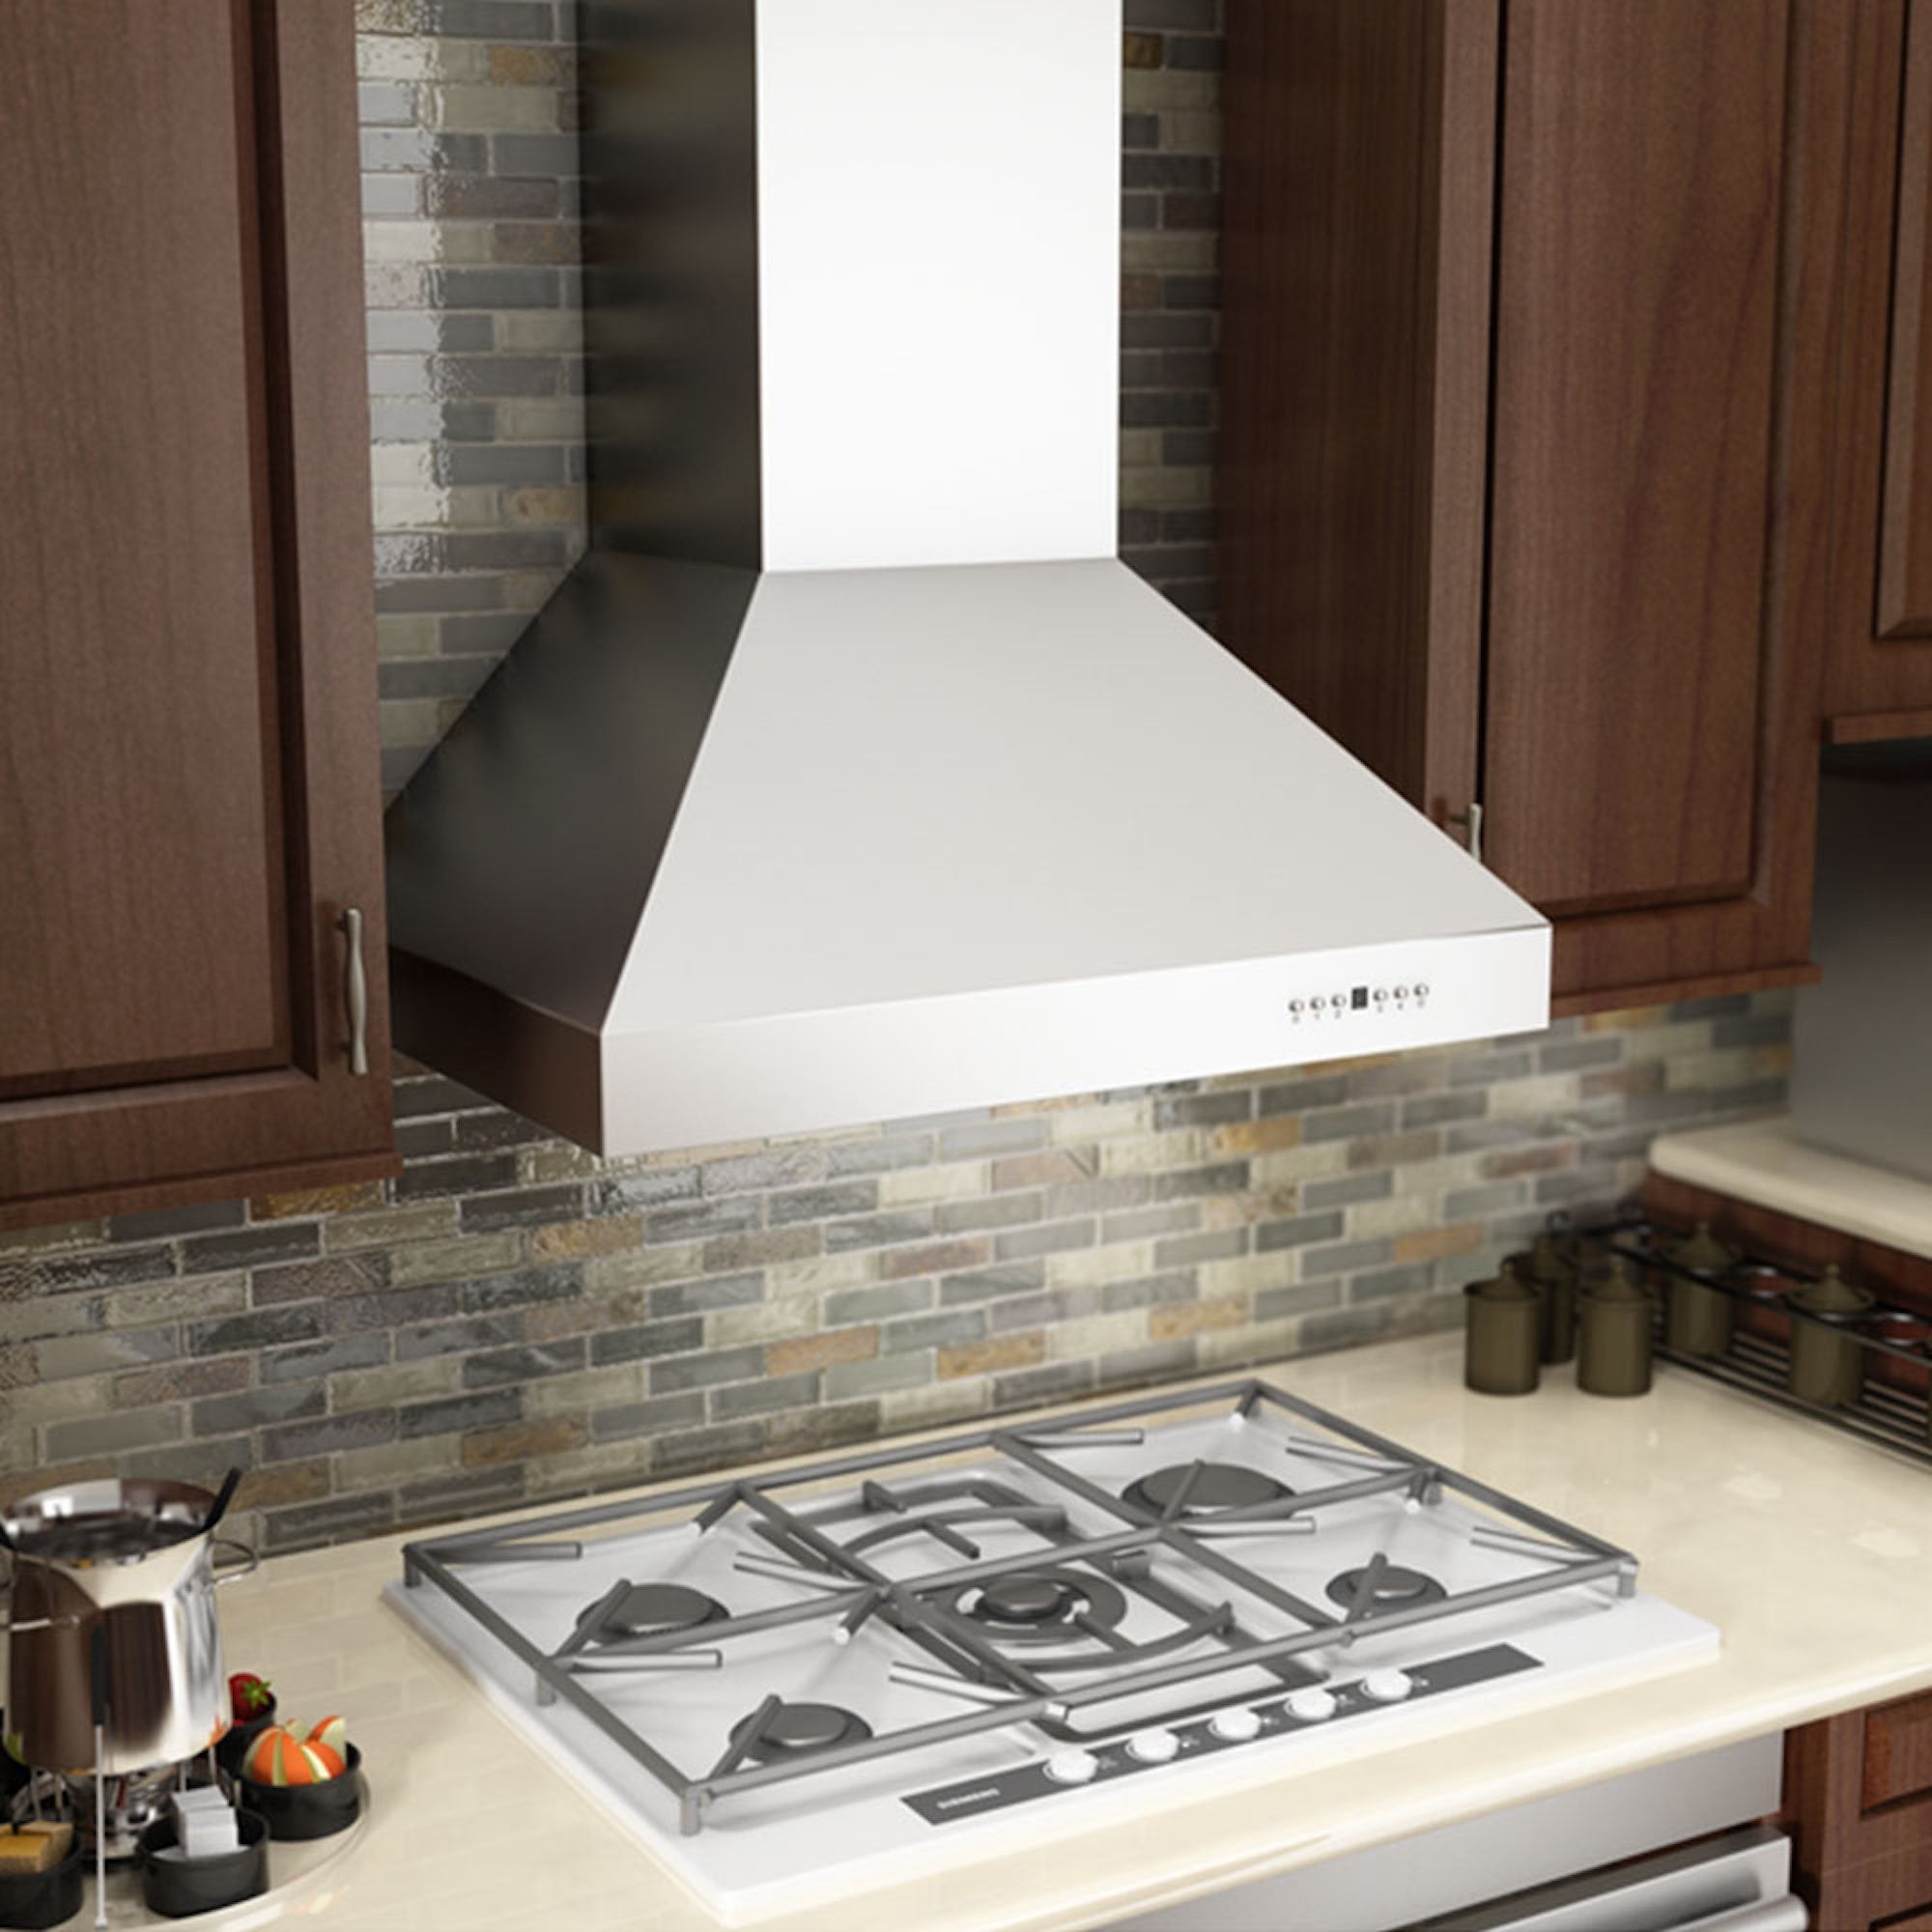 ZLINE Outdoor Wall Mount Range Hood in Outdoor Approved Stainless Steel (667-304) in a rustic kitchen from above.